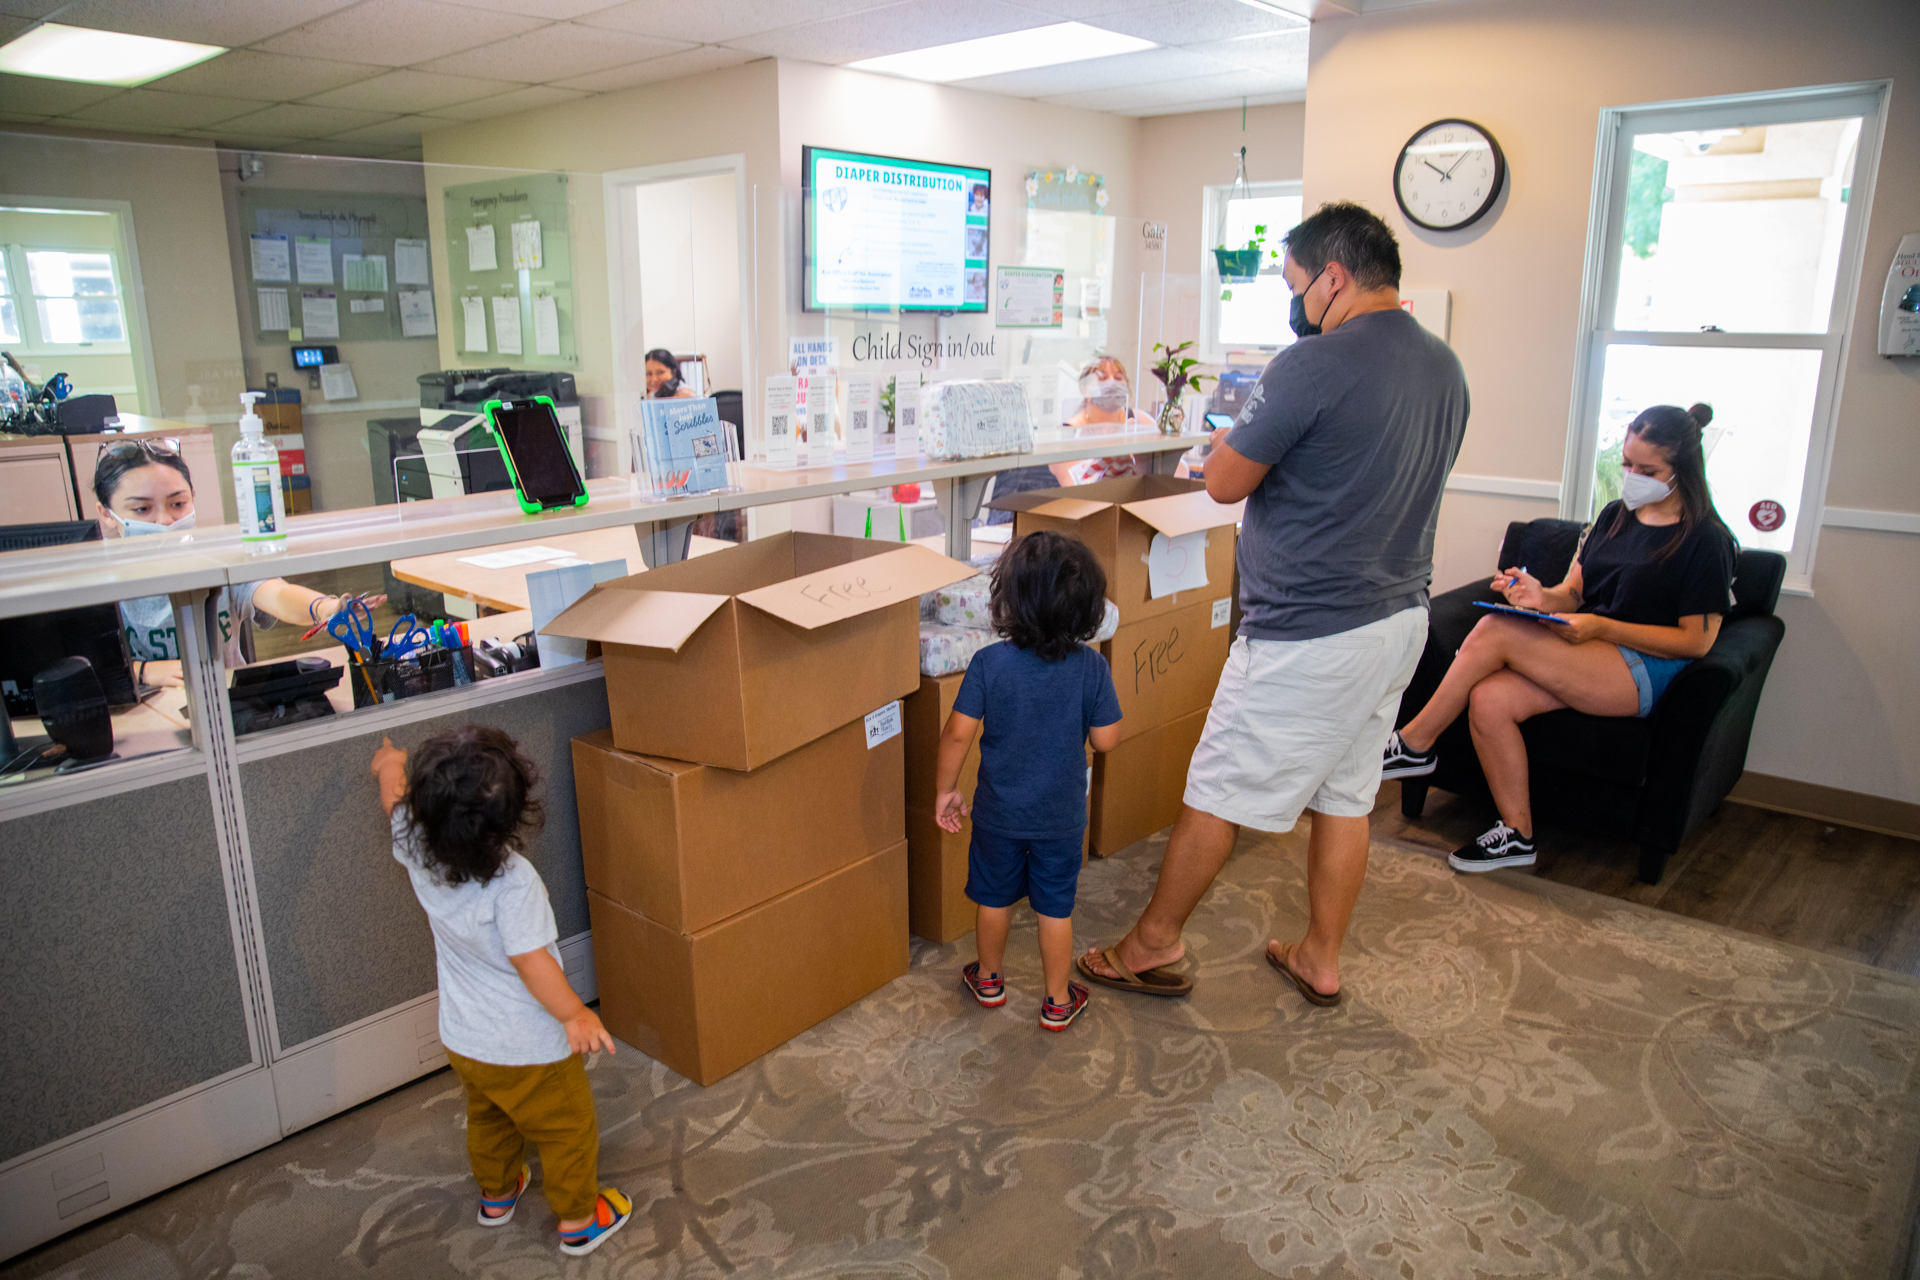 Parents and their children visit the Sacramento State ASI Children's Center, which partners with the Sacramento Food Bank to distribute free diapers.